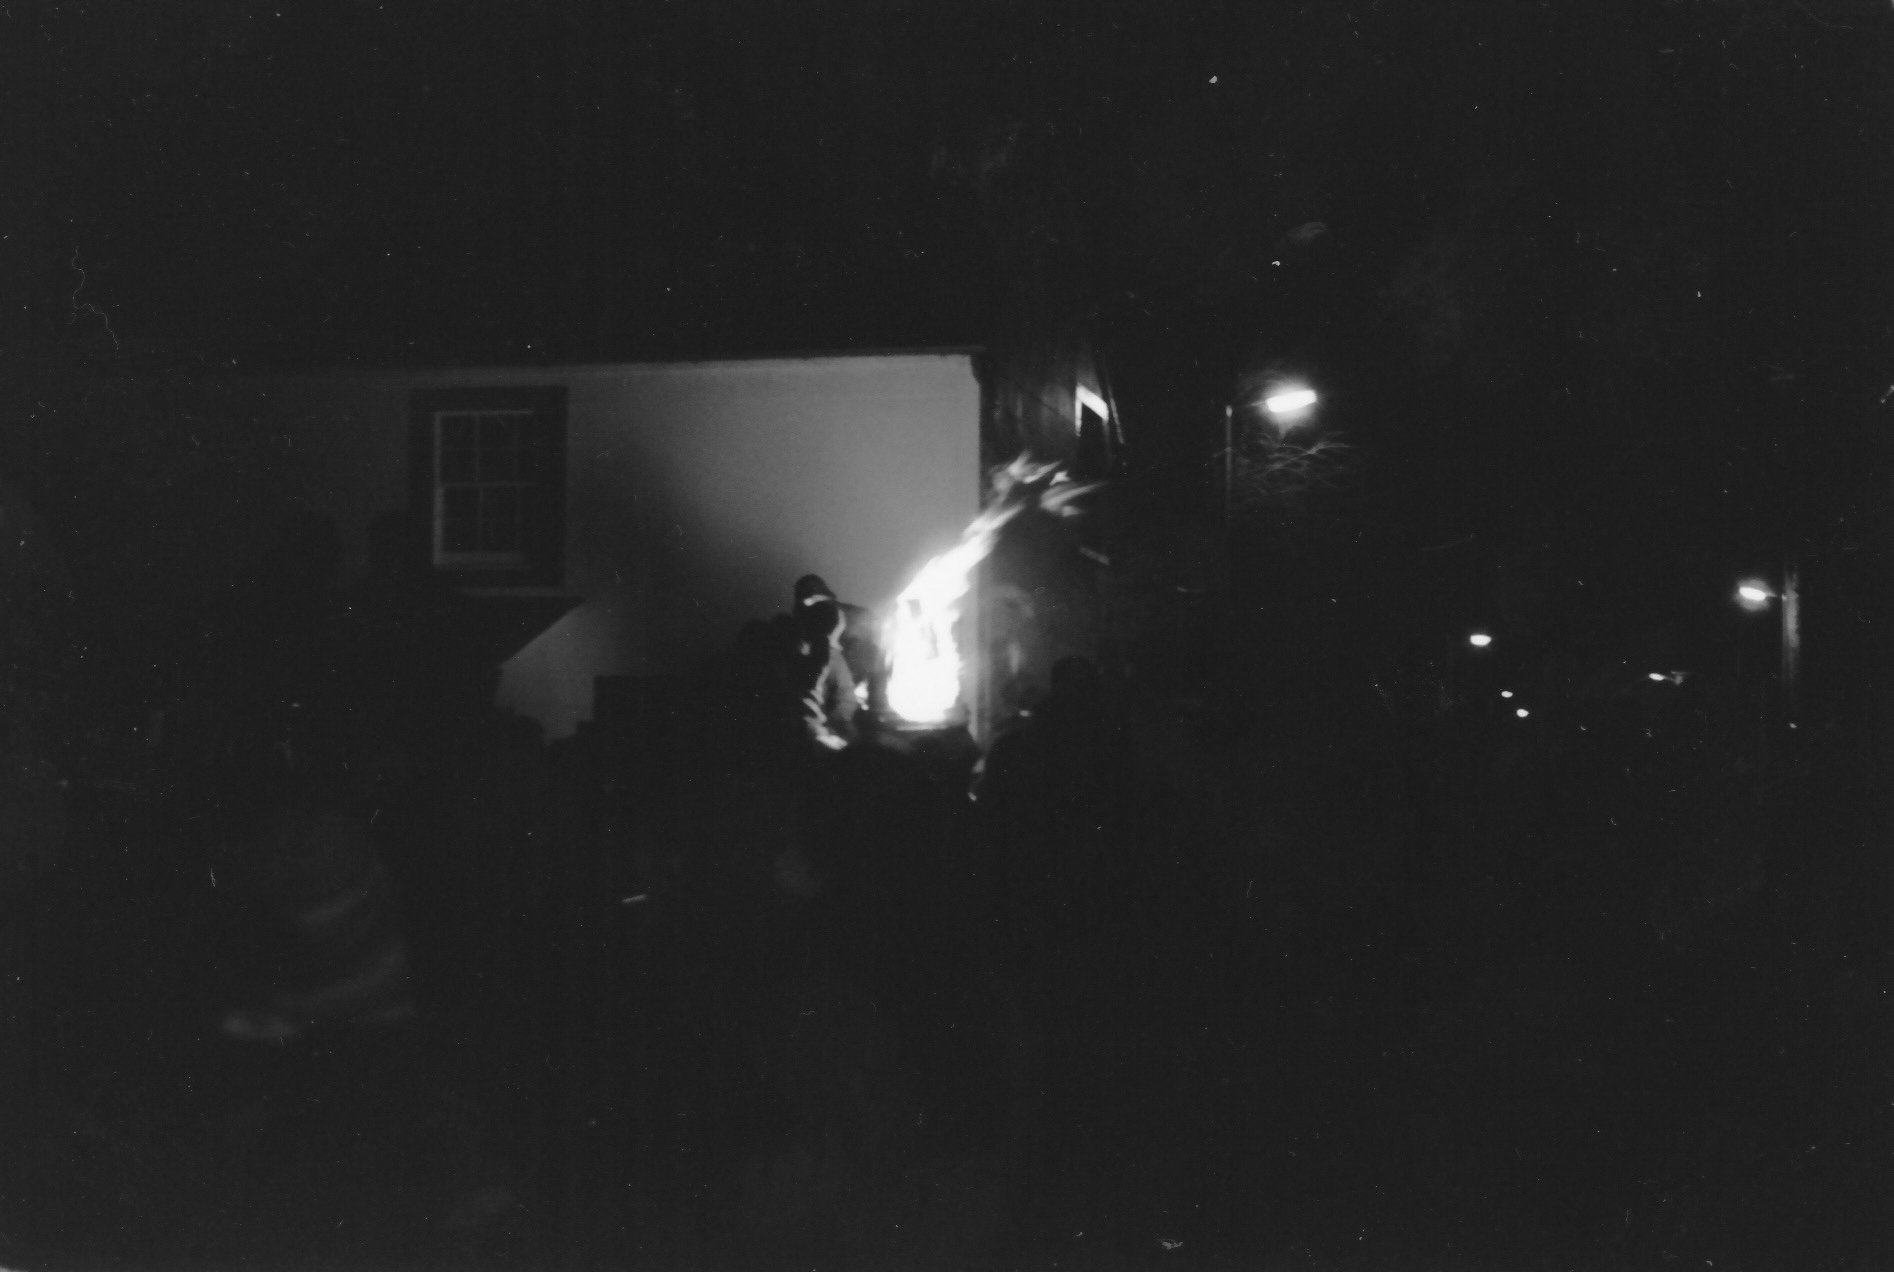 A blurry black and white photograph showing a figure standing next to a fire in front of a building, with street lights glowing in the dark.